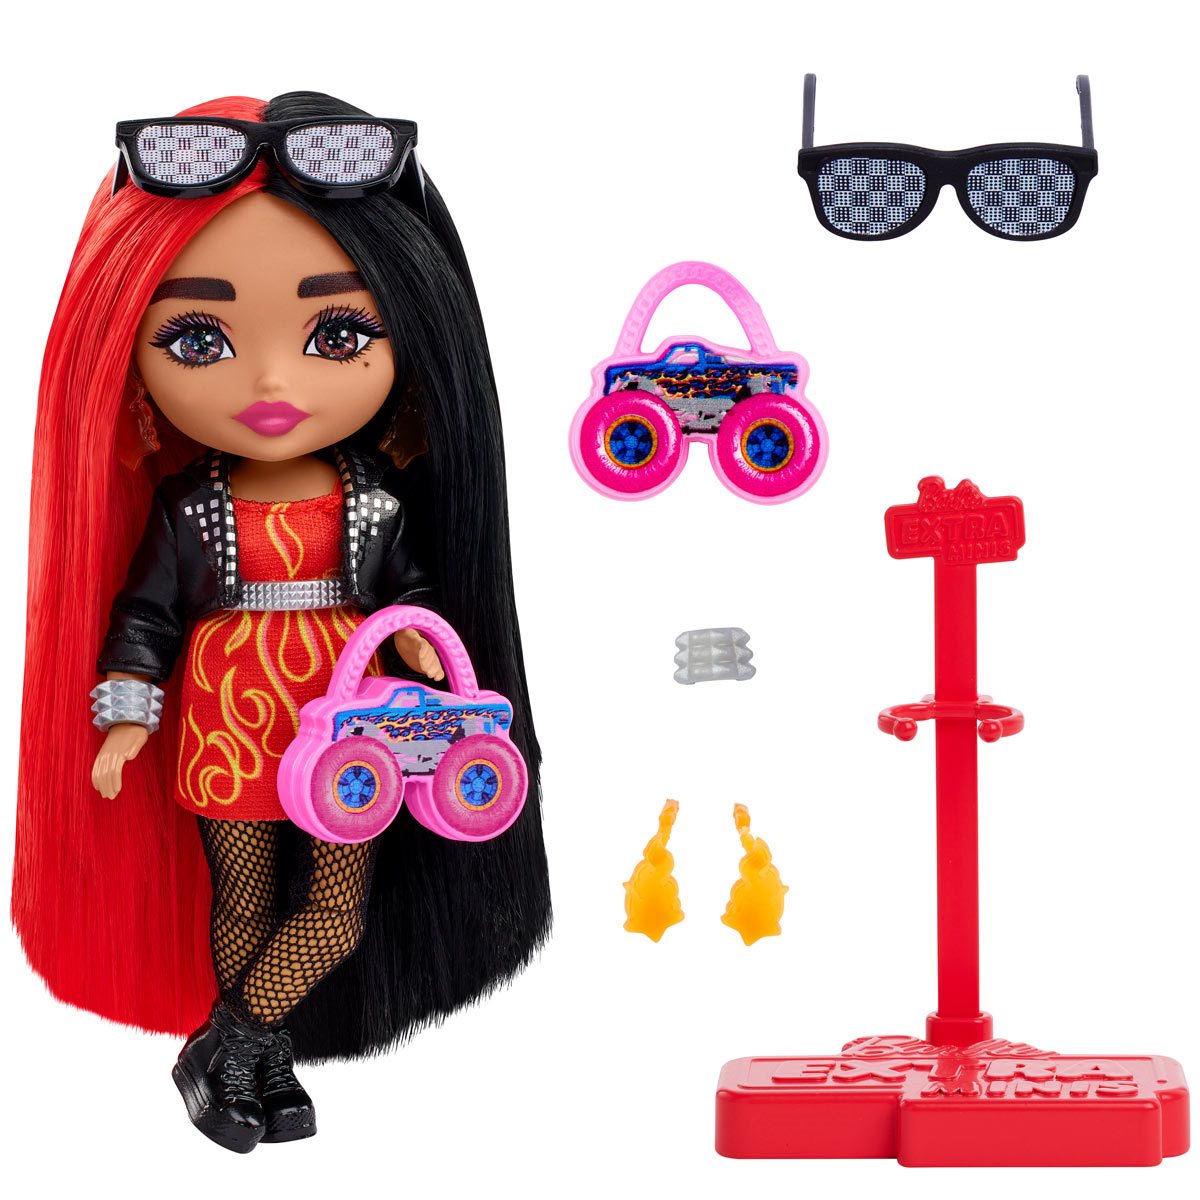 Barbie Extra Minis and Extra Mini Minis by Mattel